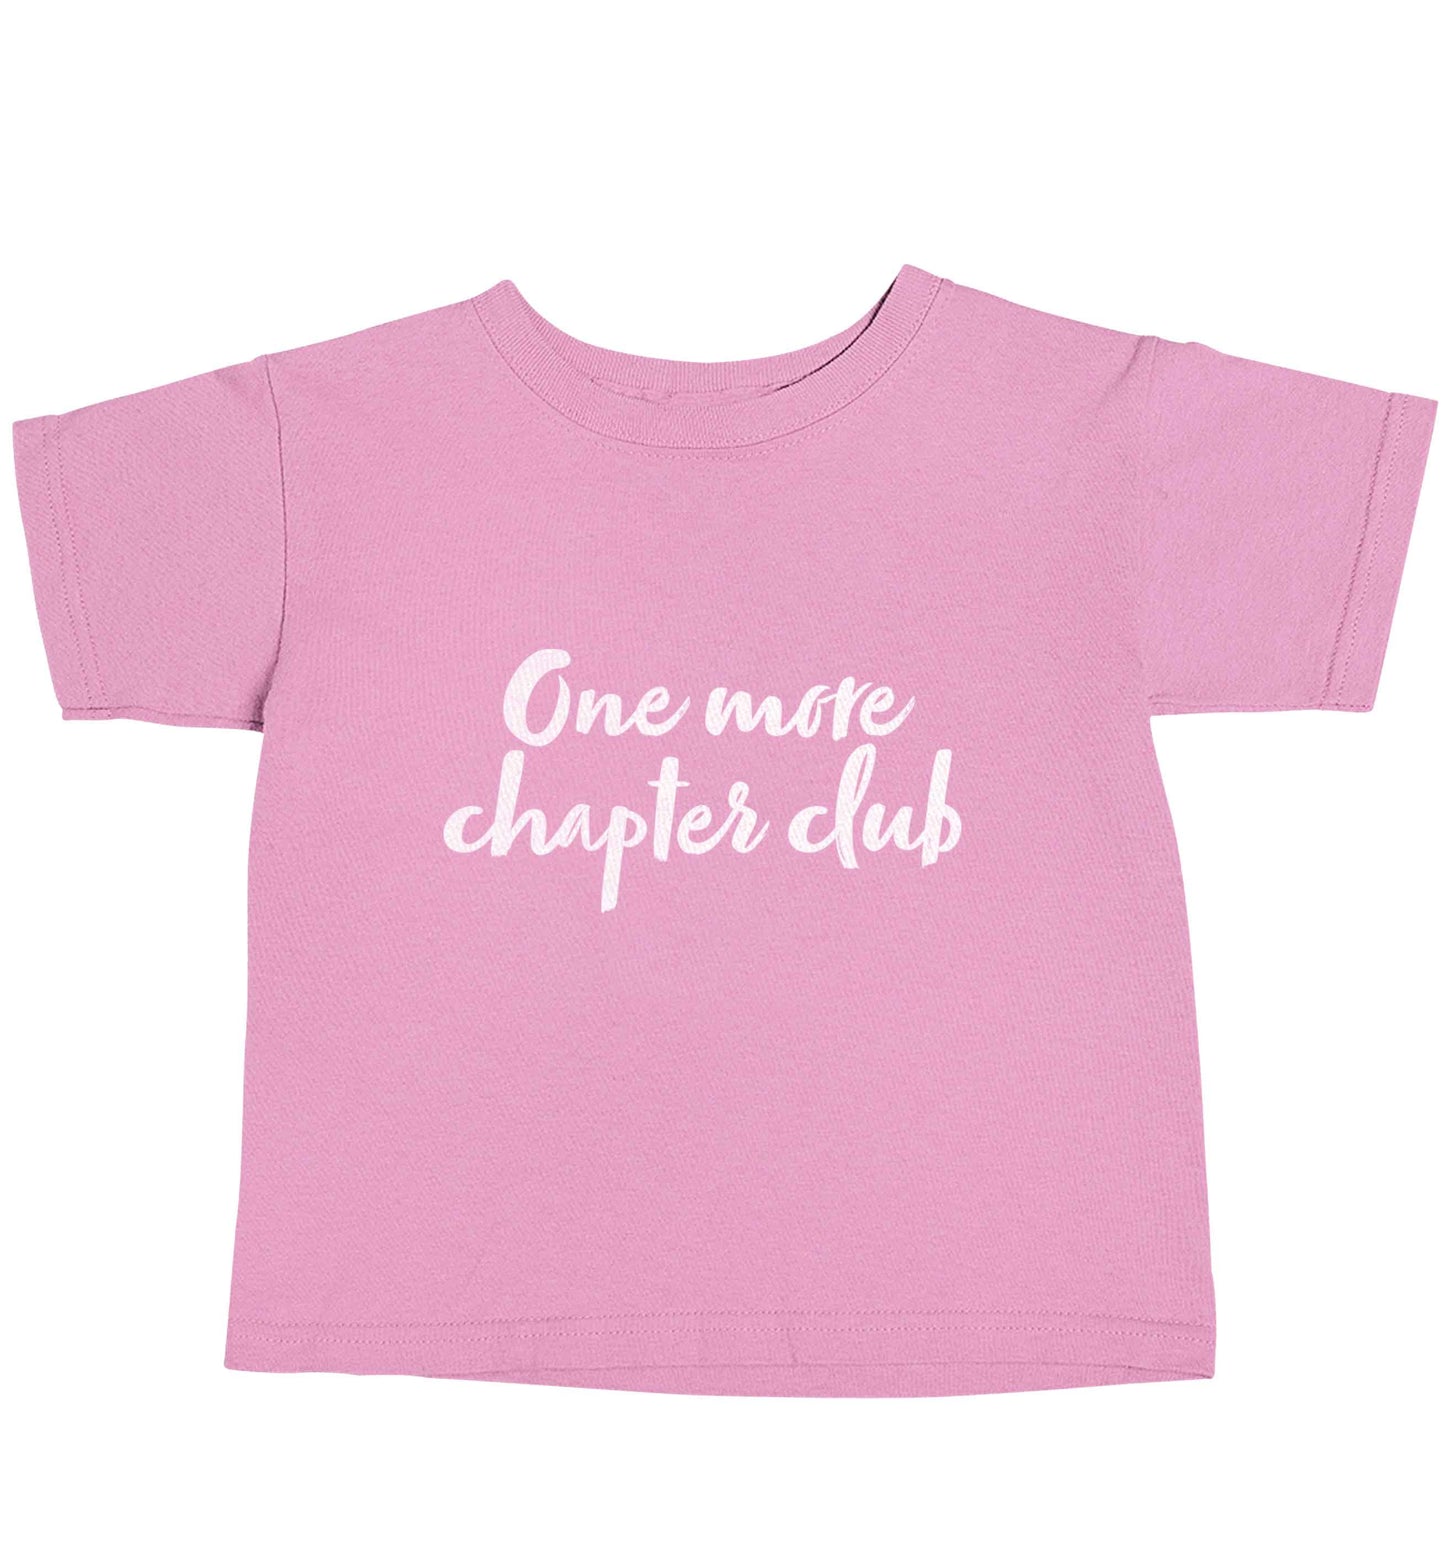 One more chapter club Kit light pink baby toddler Tshirt 2 Years